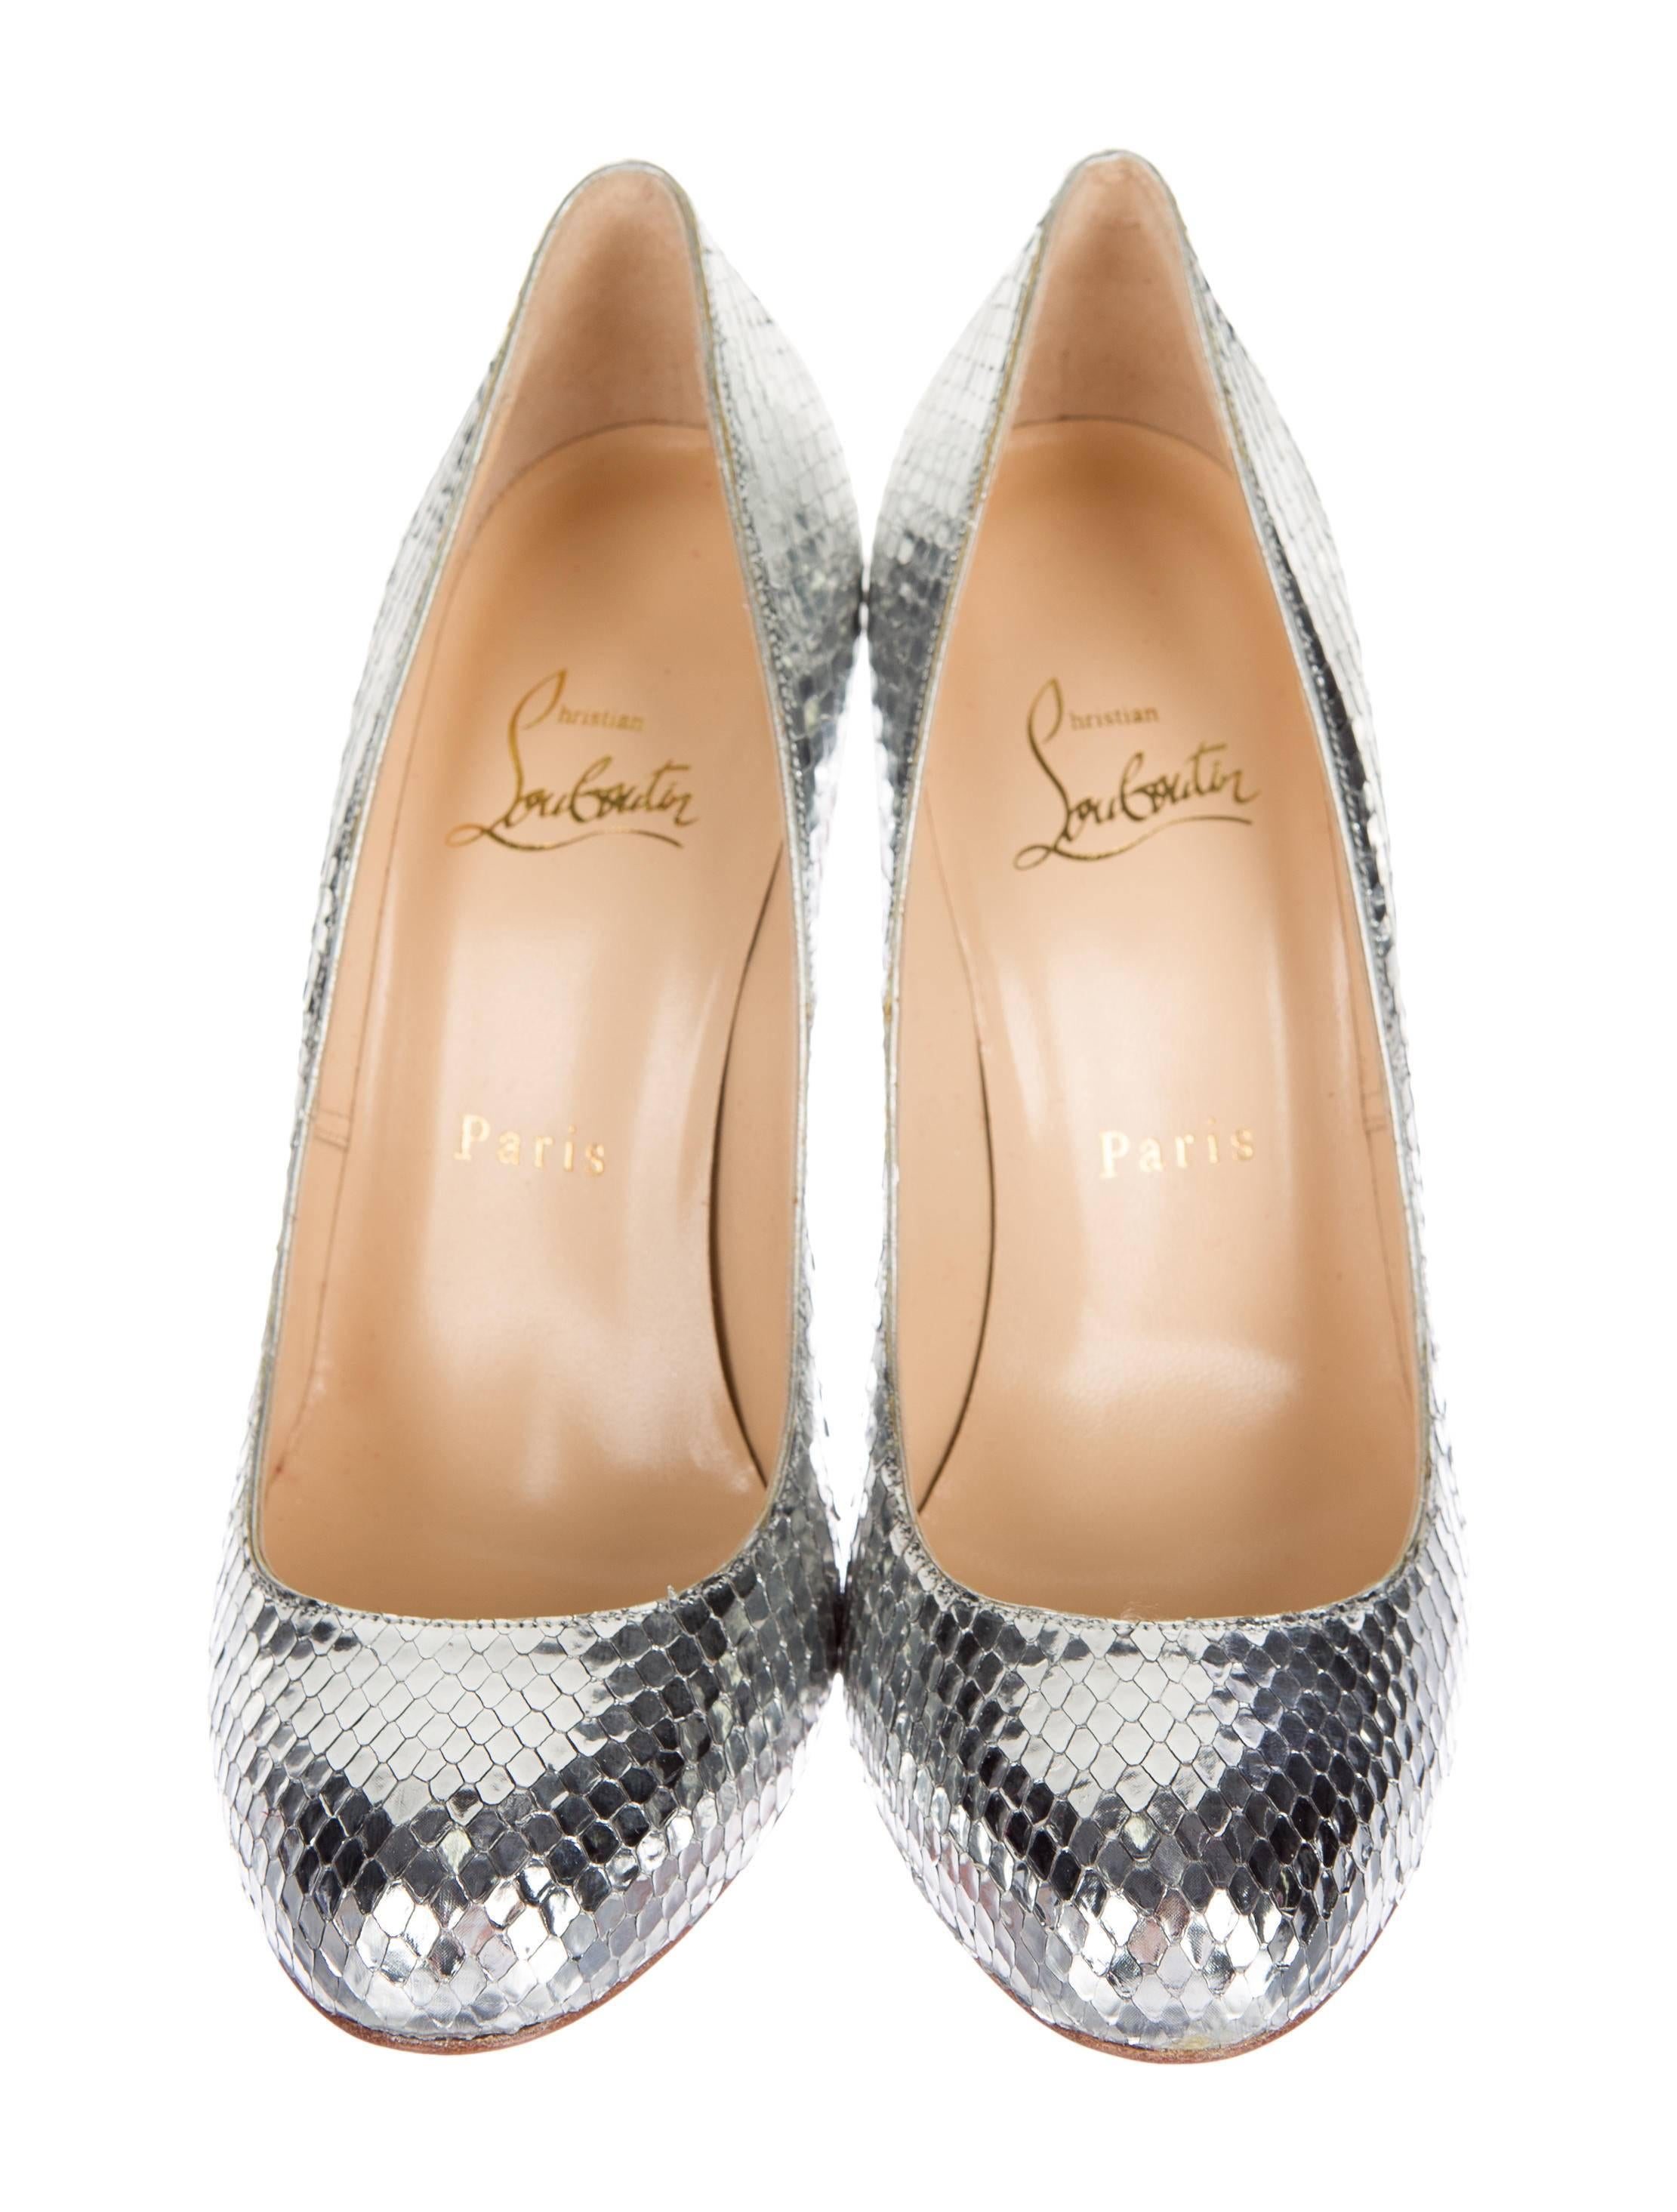 CURATOR'S NOTES

Christian Louboutin New Silver Snakeskin Leather Evening Heels Pumps in Box   

Size IT 36.5
Python snakeskin
Slip on 
Made in Italy
Heel height 4"
Includes original Christian Louboutin box and dust bag